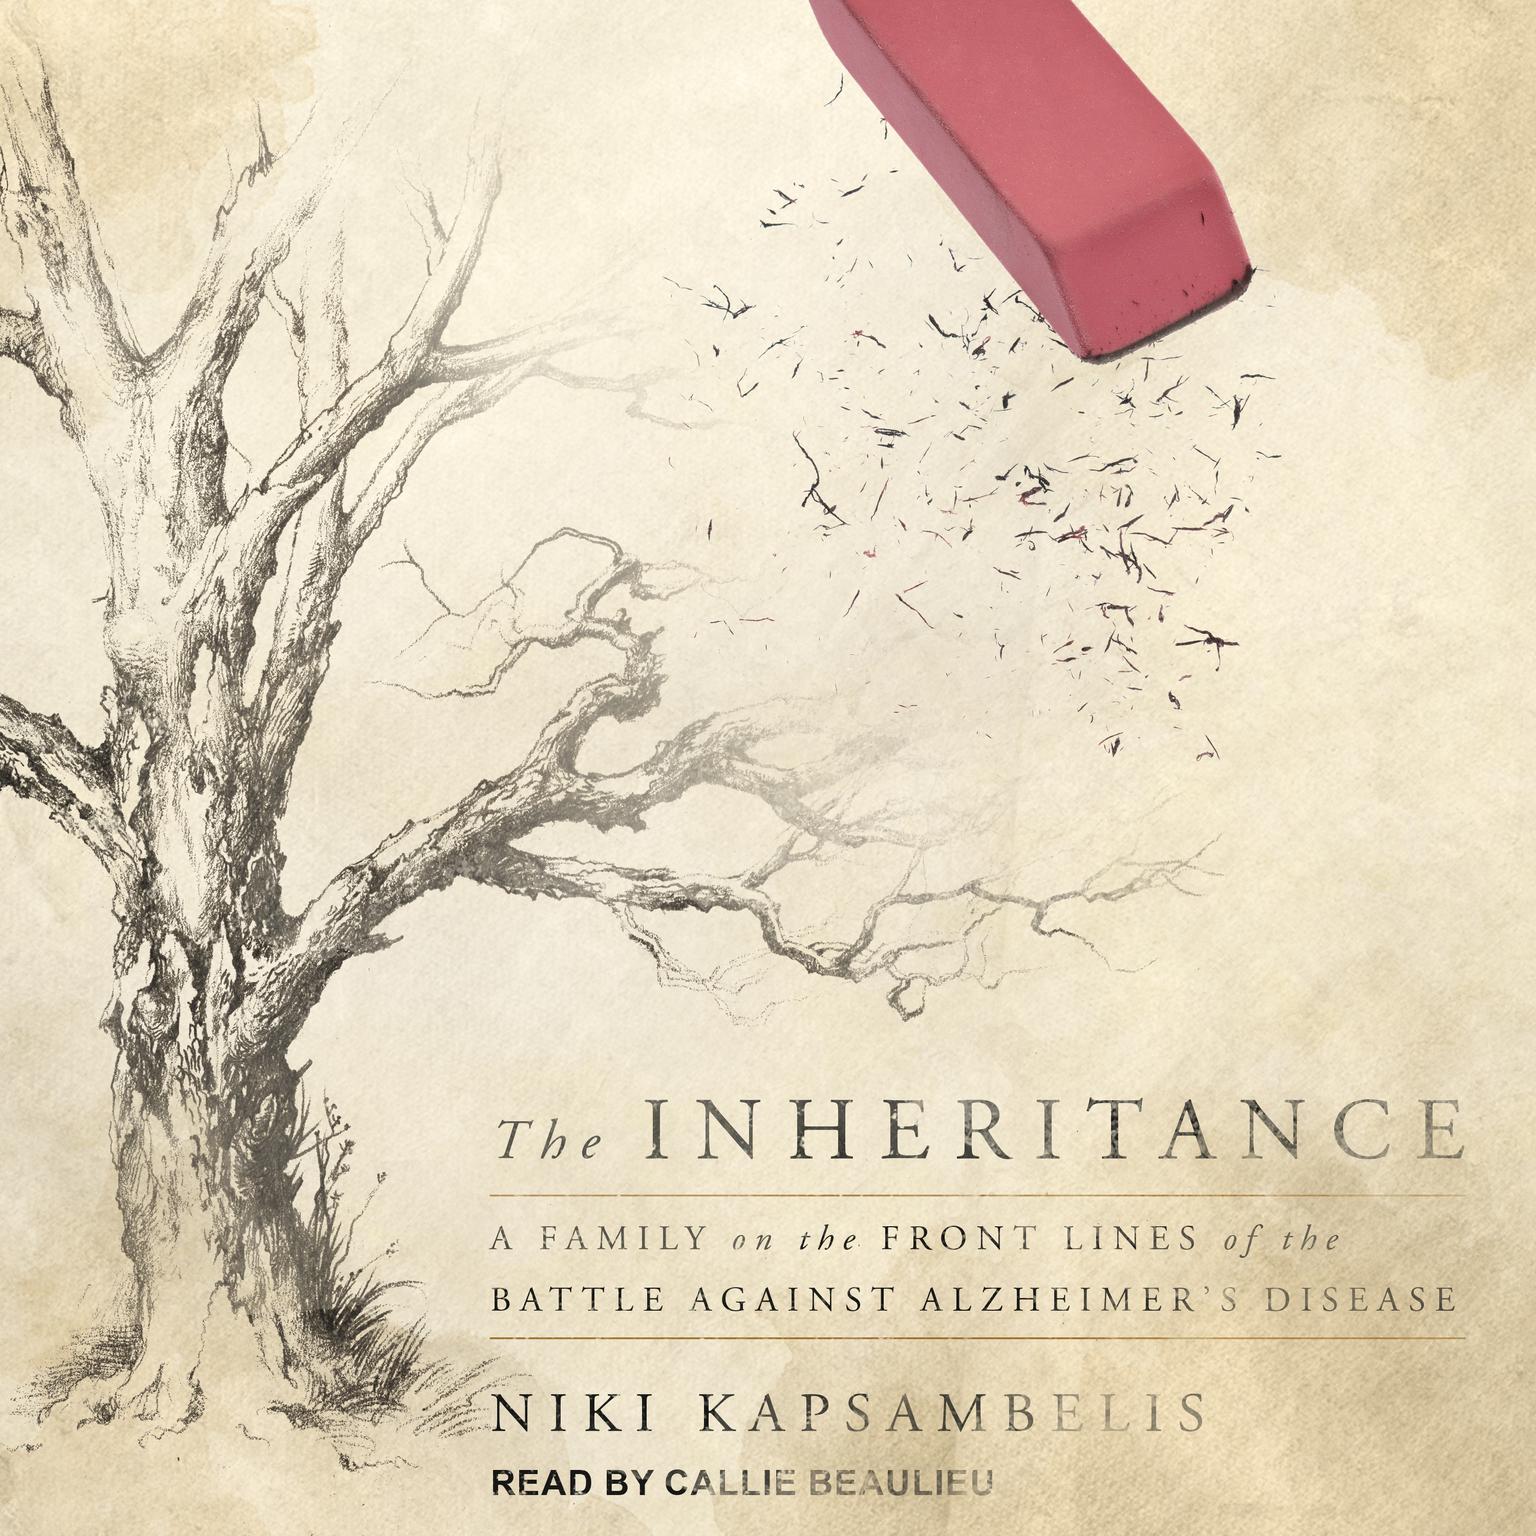 The Inheritance: A Family on the Front Lines of the Battle Against Alzheimers Disease Audiobook, by Niki Kapsambelis